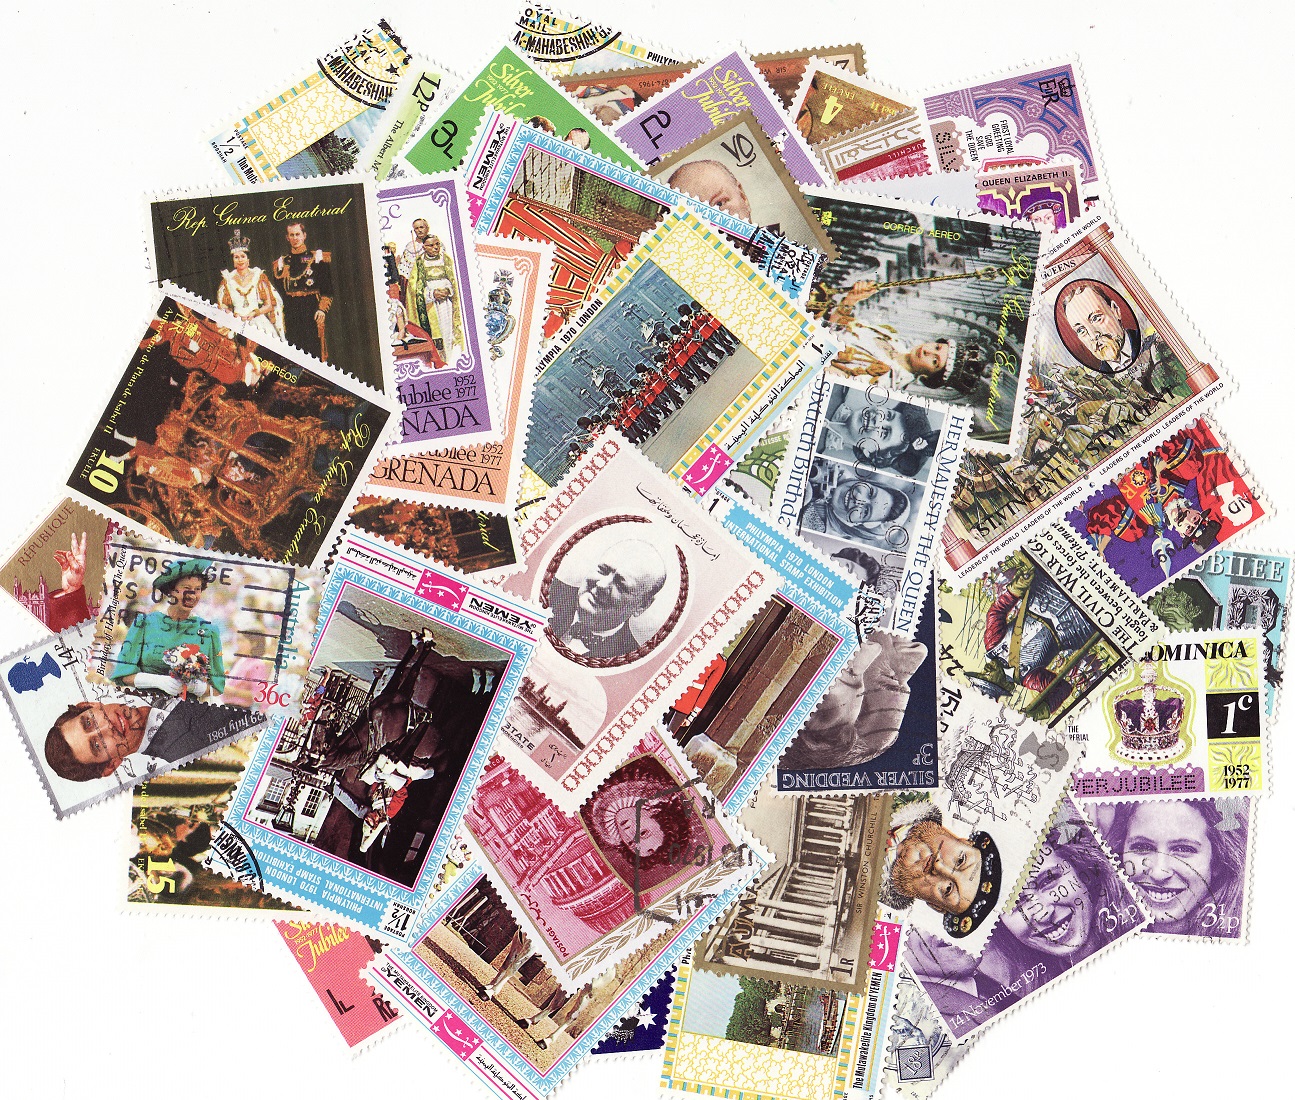  English Royalty on Stamps, Topical Stamp Packet, 100 different stamps